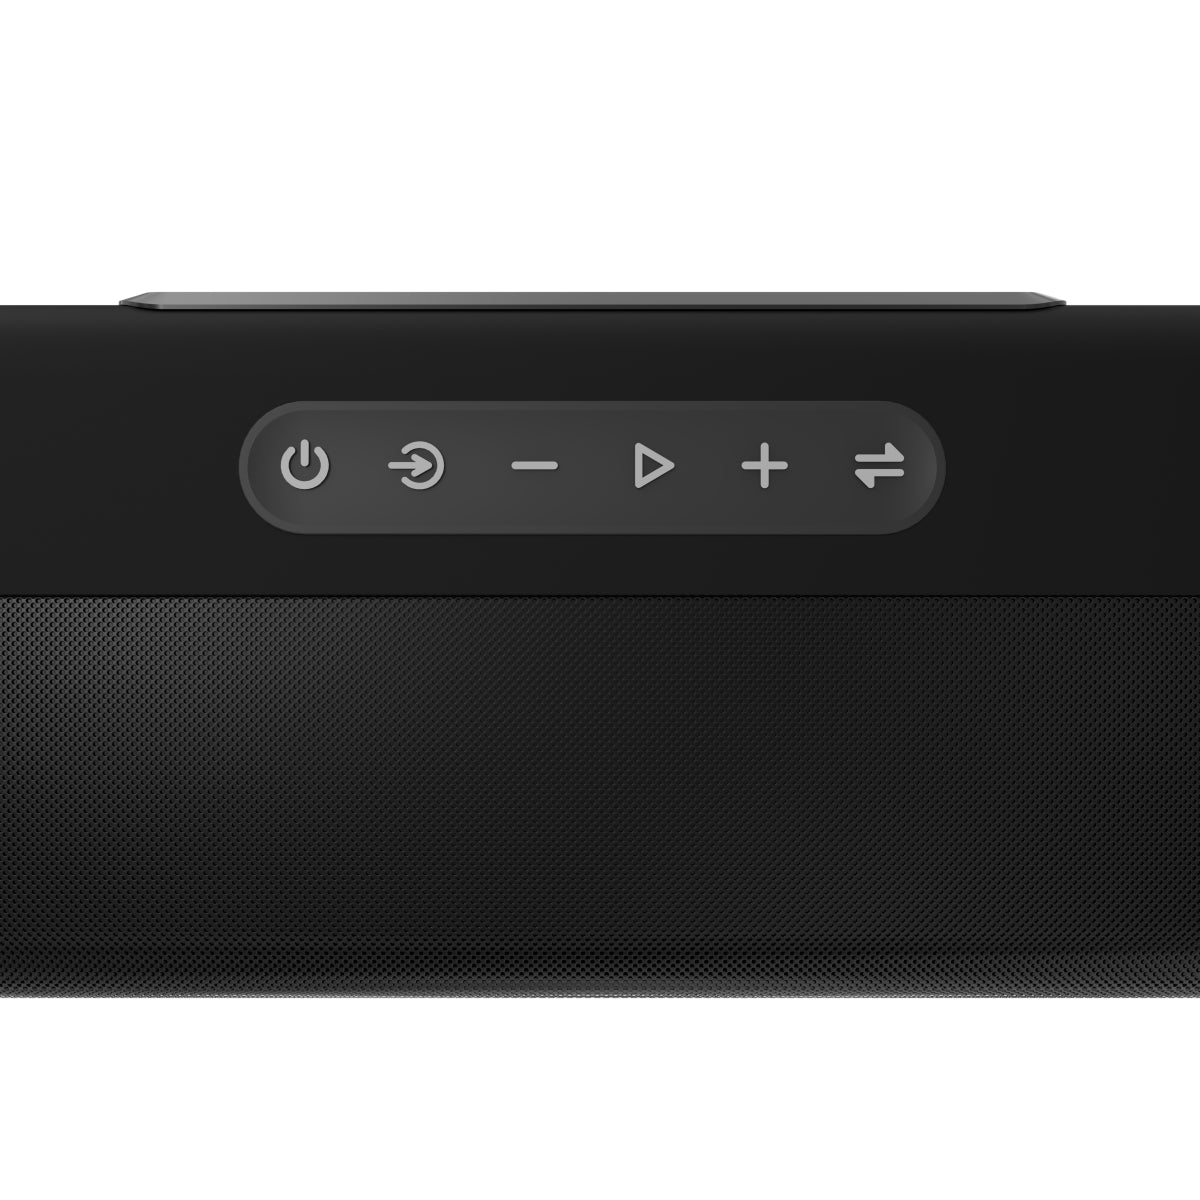 Portronics Sound Slick IV Bluetooth Soundbar with In-built woofer,120W with multi buttons on it. Black